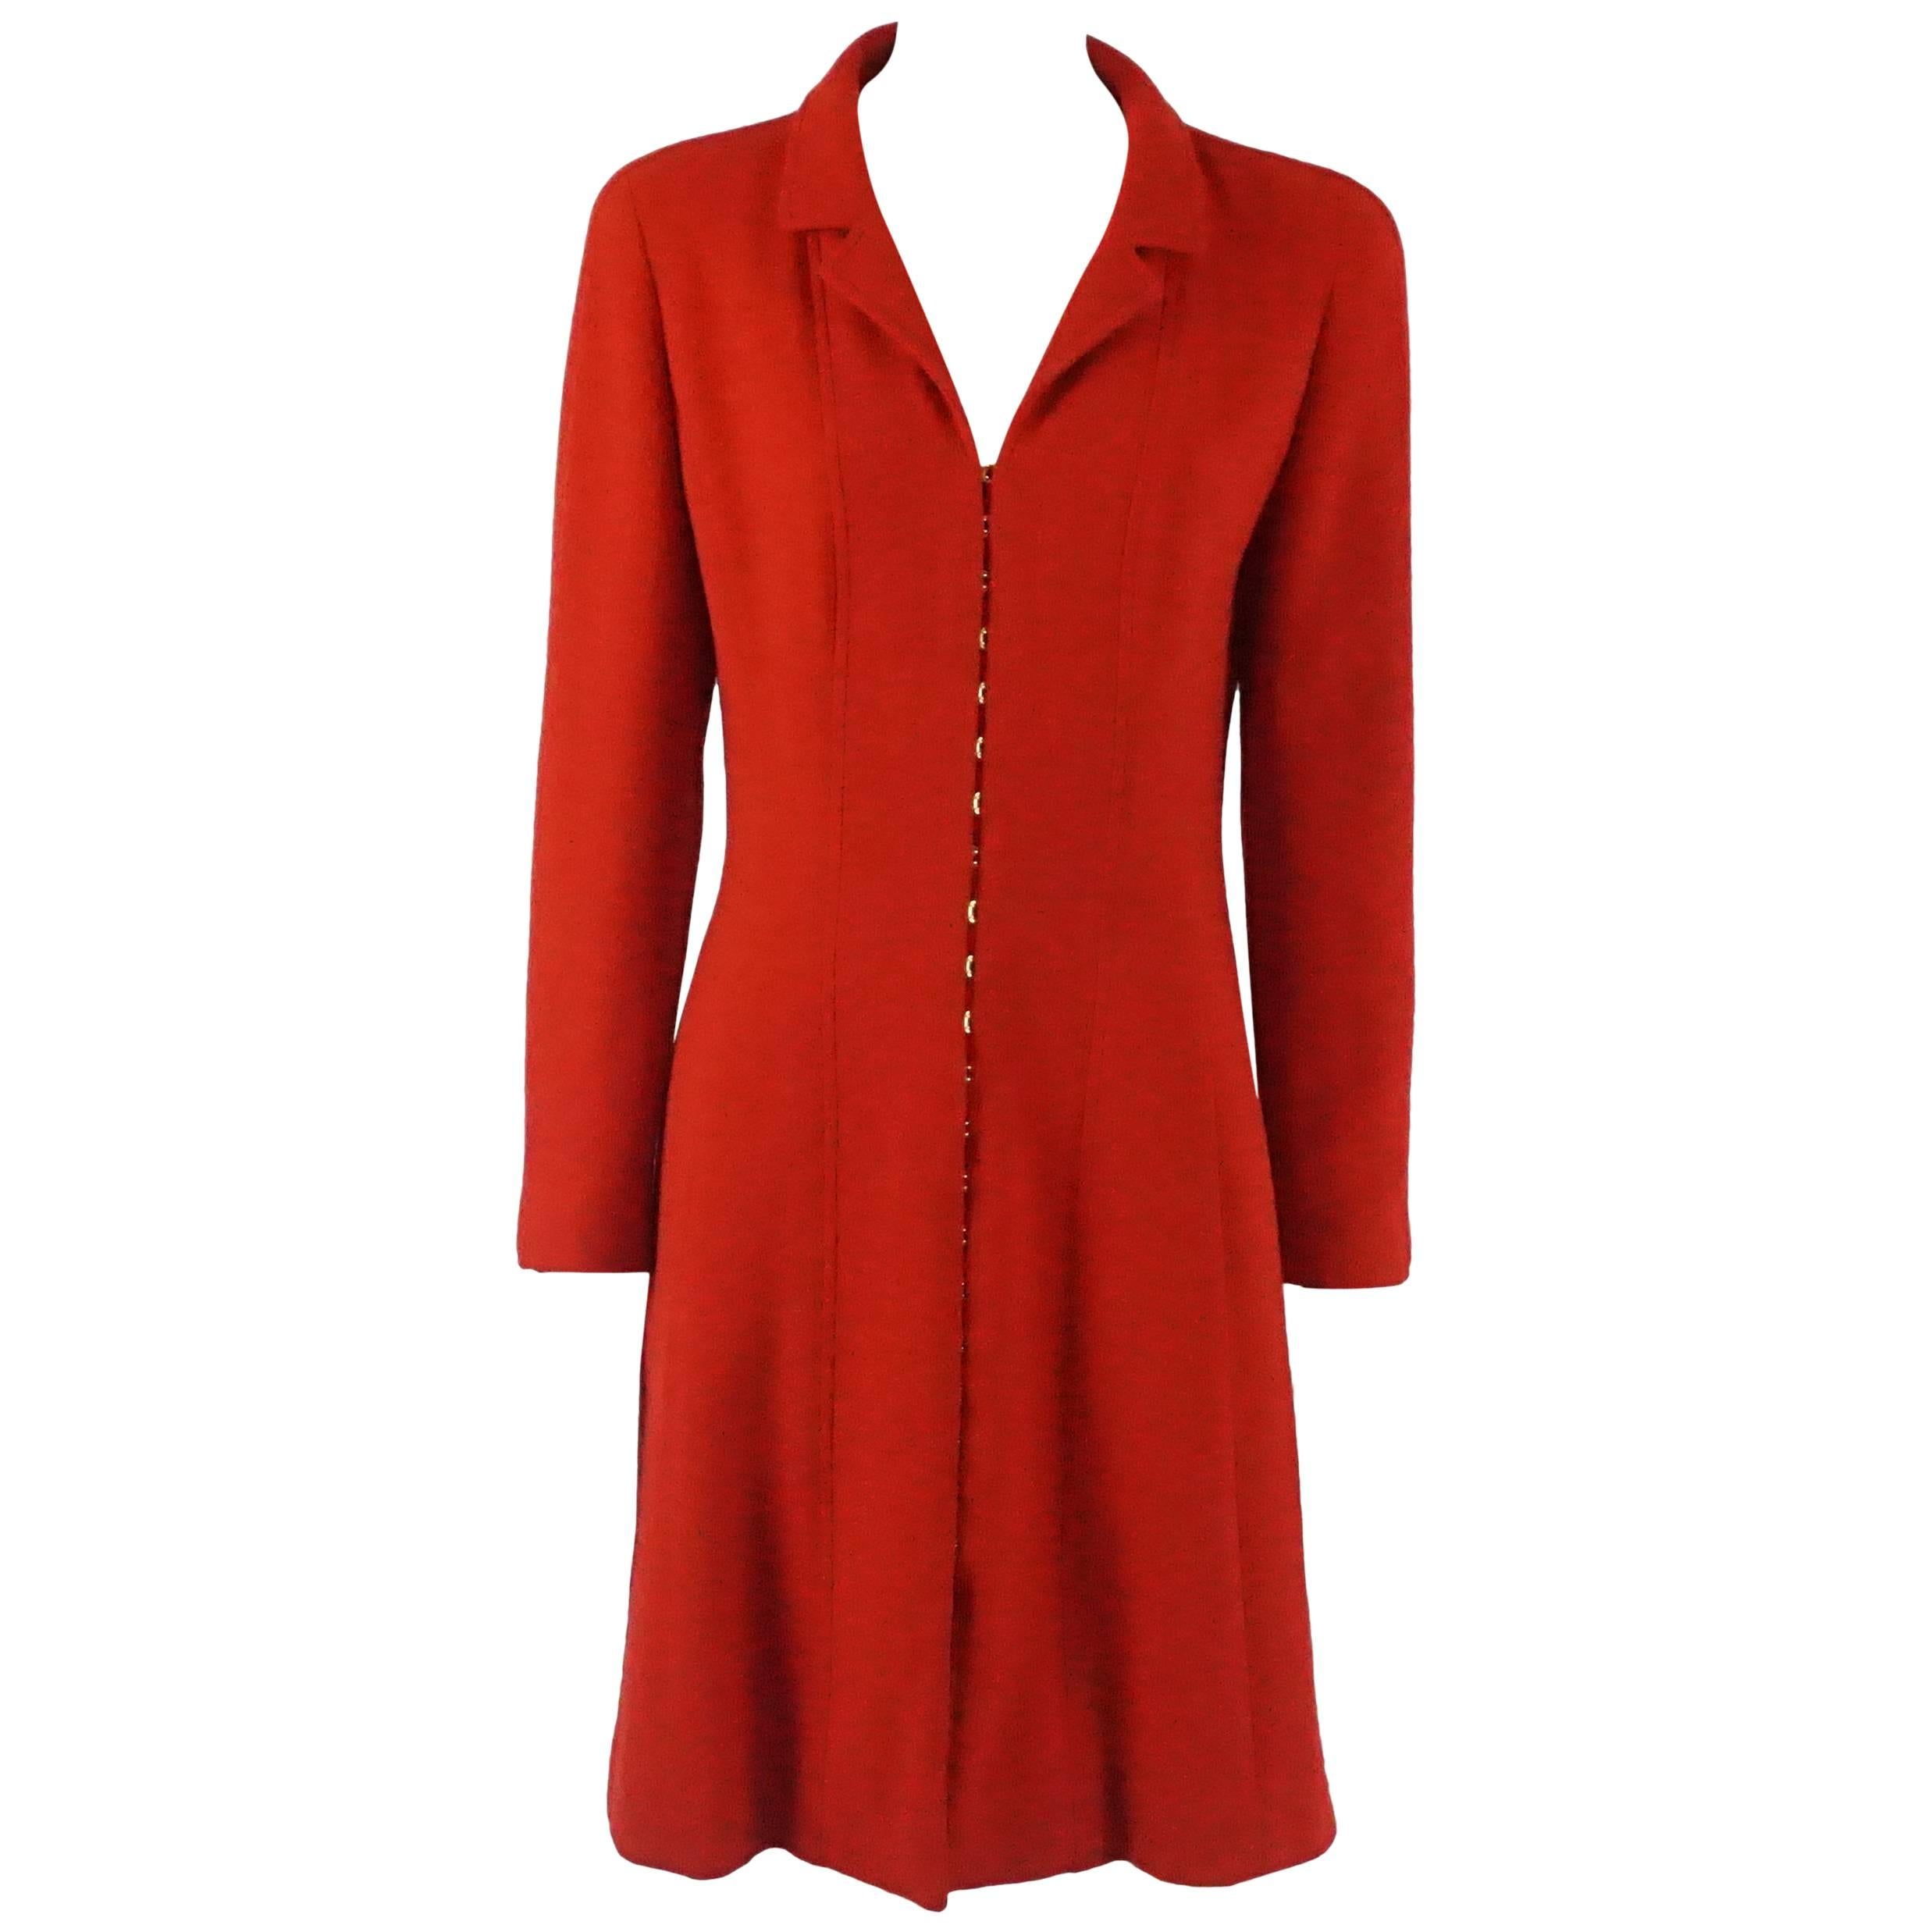 Chanel Vintage Red Double Faced Wool Coat Dress - Size 40 Circa 1996A